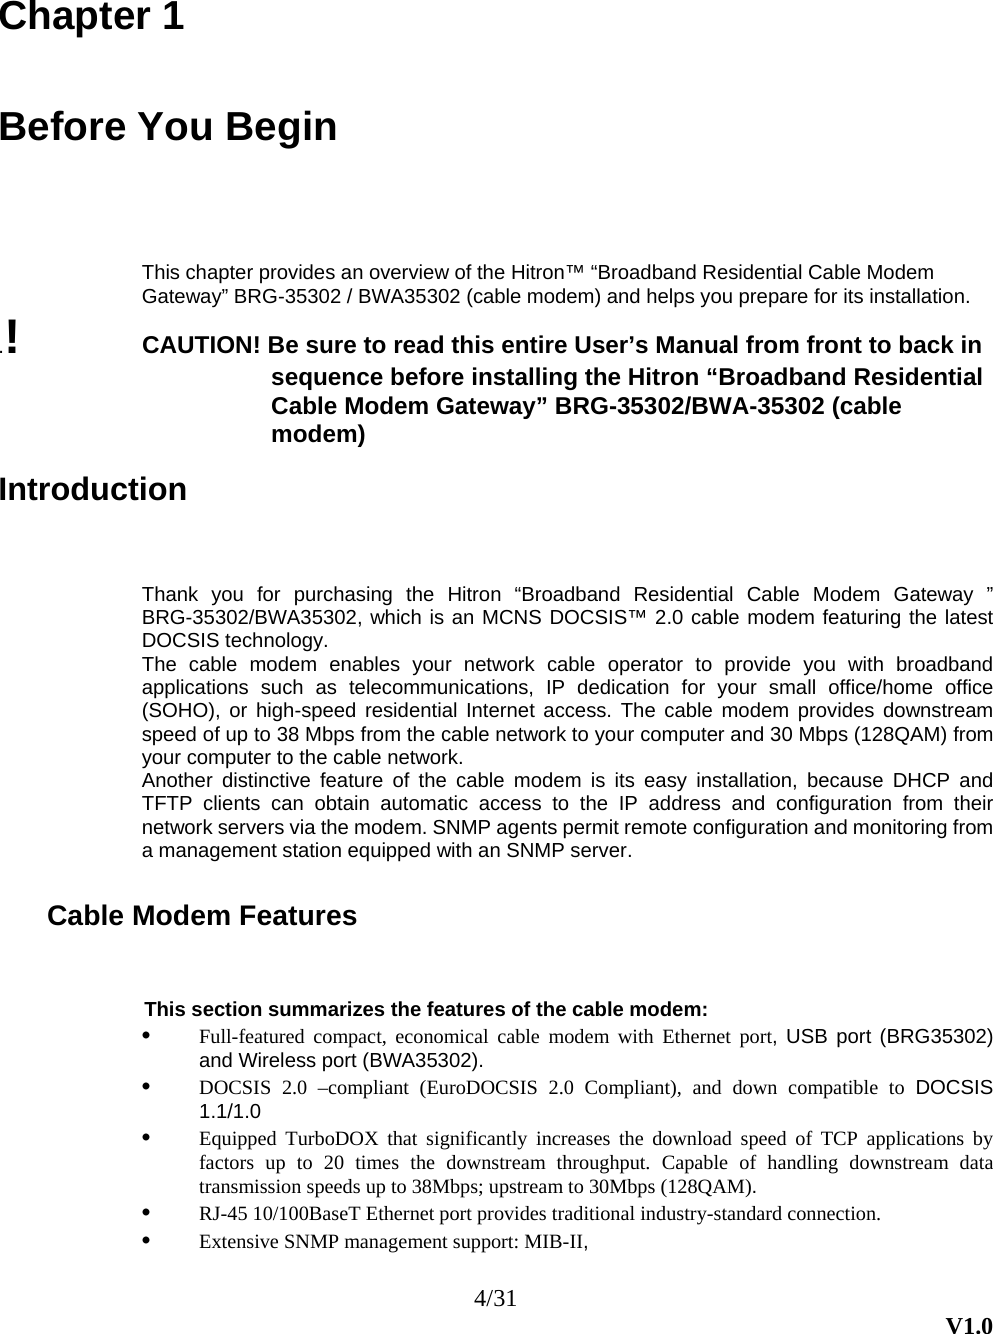 4/31  V1.0  Chapter 1  Before You Begin This chapter provides an overview of the Hitron™ “Broadband Residential Cable Modem Gateway” BRG-35302 / BWA35302 (cable modem) and helps you prepare for its installation. .!  CAUTION! Be sure to read this entire User’s Manual from front to back in sequence before installing the Hitron “Broadband Residential Cable Modem Gateway” BRG-35302/BWA-35302 (cable modem)  Introduction Thank you for purchasing the Hitron “Broadband Residential Cable Modem Gateway ” BRG-35302/BWA35302, which is an MCNS DOCSIS™ 2.0 cable modem featuring the latest DOCSIS technology. The cable modem enables your network cable operator to provide you with broadband applications such as telecommunications, IP dedication for your small office/home office (SOHO), or high-speed residential Internet access. The cable modem provides downstream speed of up to 38 Mbps from the cable network to your computer and 30 Mbps (128QAM) from your computer to the cable network. Another distinctive feature of the cable modem is its easy installation, because DHCP and TFTP clients can obtain automatic access to the IP address and configuration from their network servers via the modem. SNMP agents permit remote configuration and monitoring from a management station equipped with an SNMP server.  Cable Modem Features This section summarizes the features of the cable modem: •  Full-featured compact, economical cable modem with Ethernet port, USB port (BRG35302) and Wireless port (BWA35302). •  DOCSIS 2.0 –compliant (EuroDOCSIS 2.0 Compliant), and down compatible to DOCSIS 1.1/1.0 •  Equipped TurboDOX that significantly increases the download speed of TCP applications by factors up to 20 times the downstream throughput. Capable of handling downstream data transmission speeds up to 38Mbps; upstream to 30Mbps (128QAM). •  RJ-45 10/100BaseT Ethernet port provides traditional industry-standard connection. •  Extensive SNMP management support: MIB-II, 